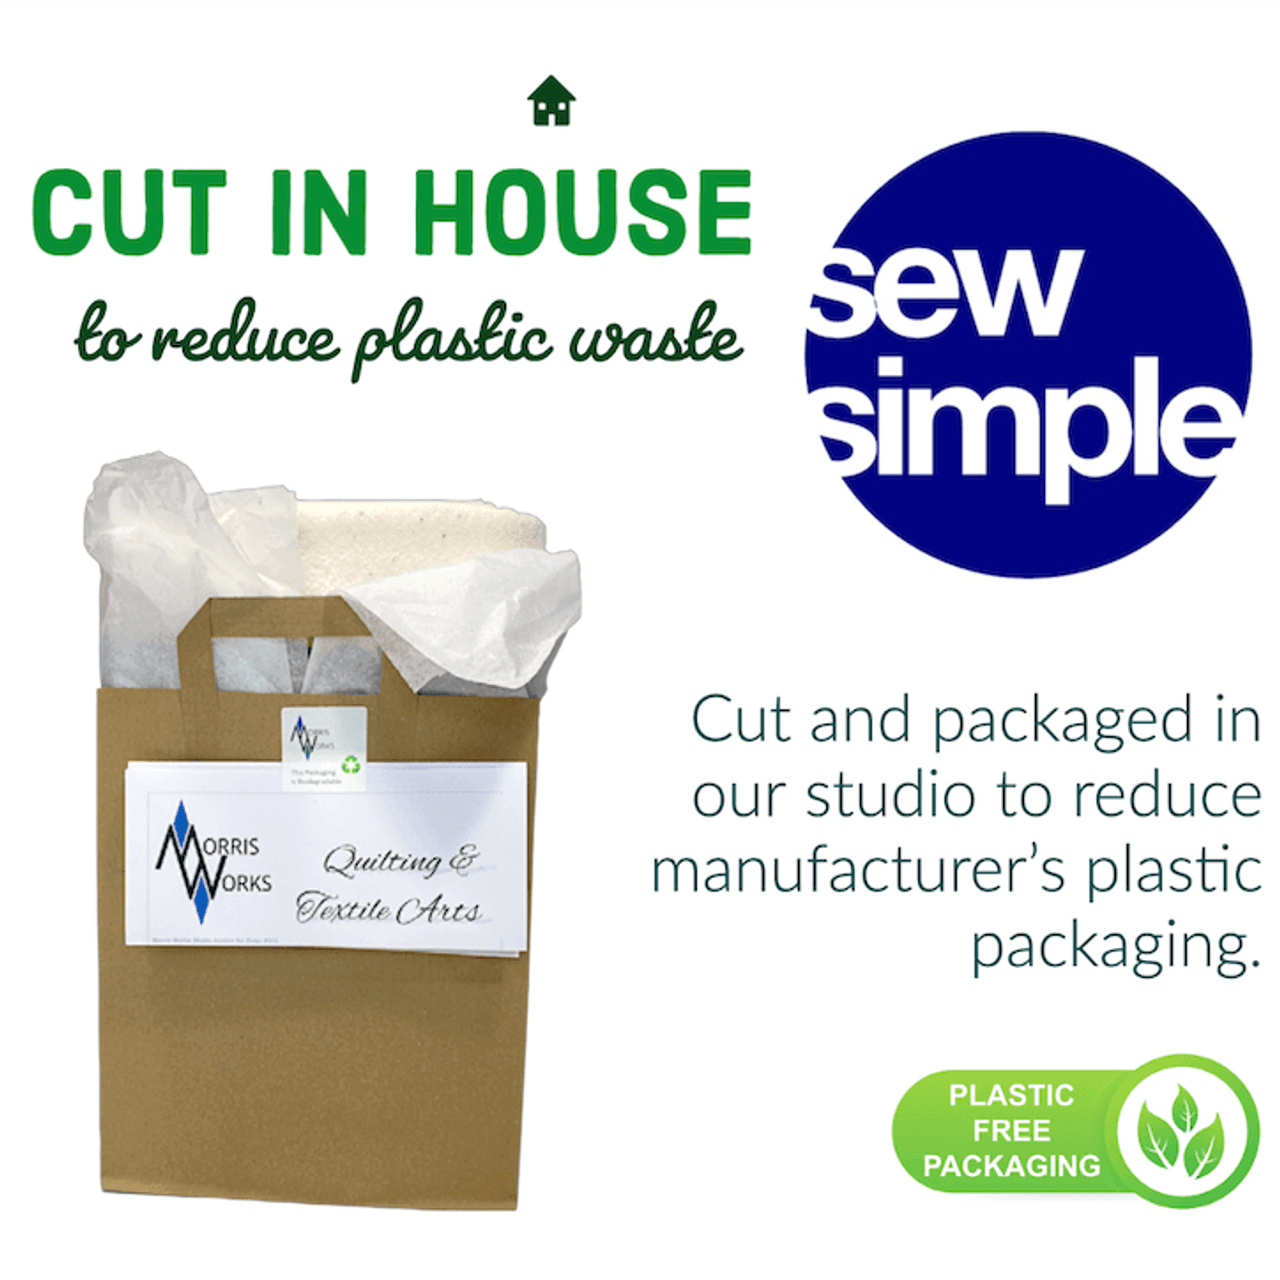 We cut all our Sew Simple Wadding in house and use plastic free packaging to reduce